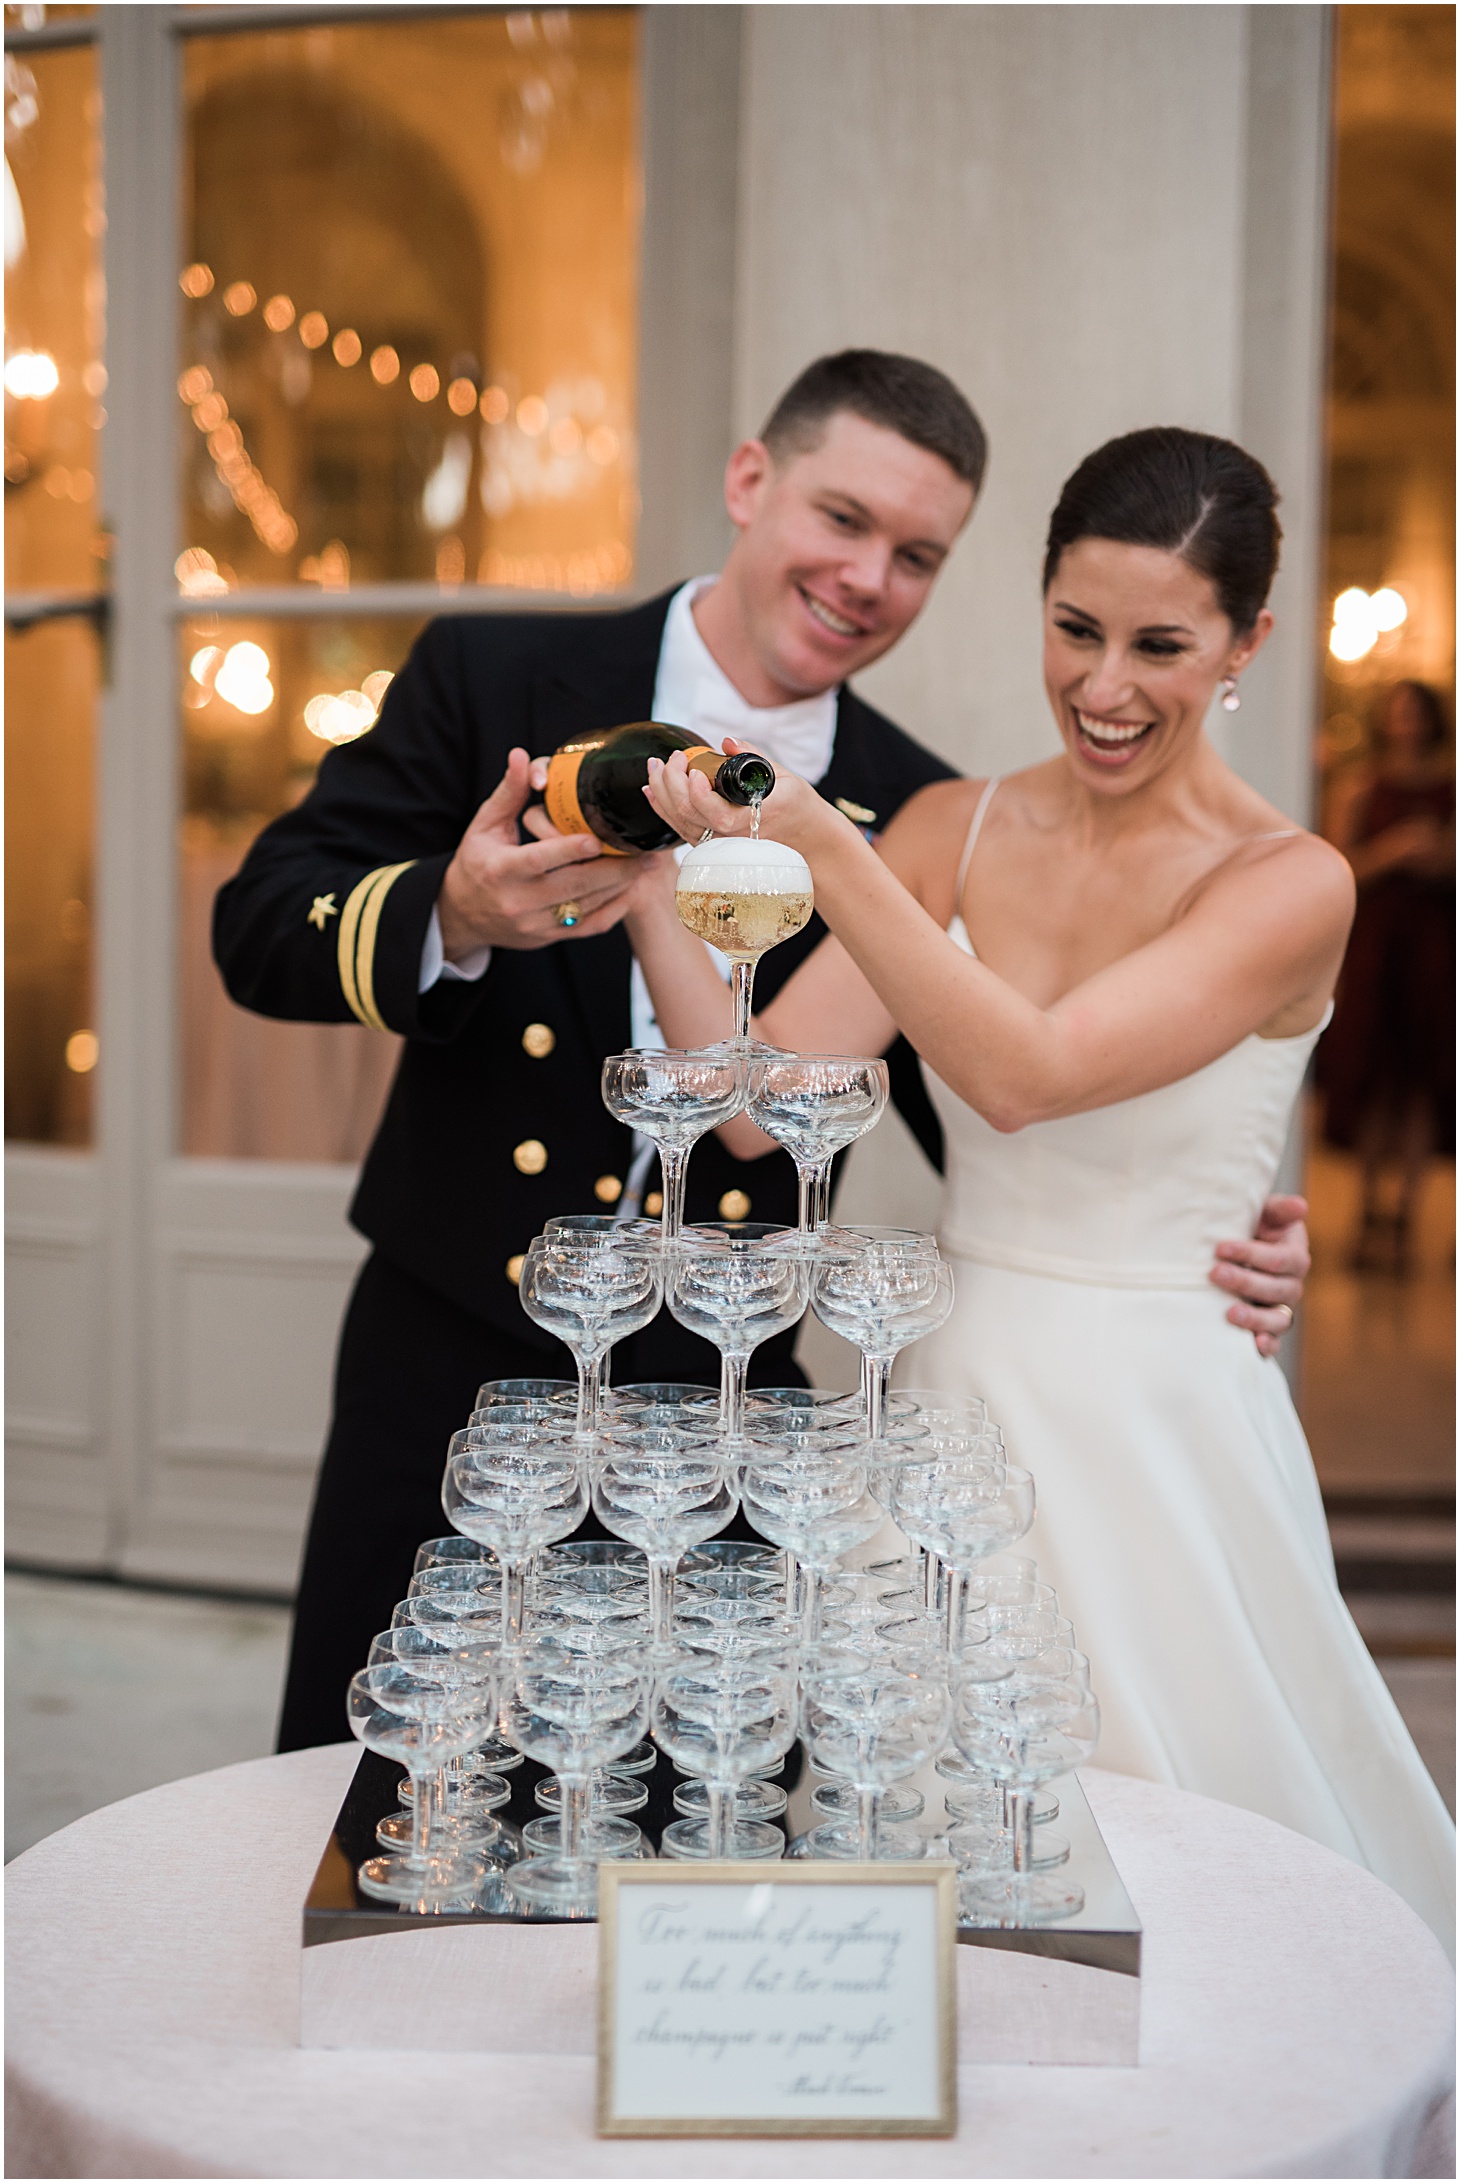 Champagne Tower - A Thoroughly Washingtonian Wedding at Meridian House in DC by Sarah Bradshaw 